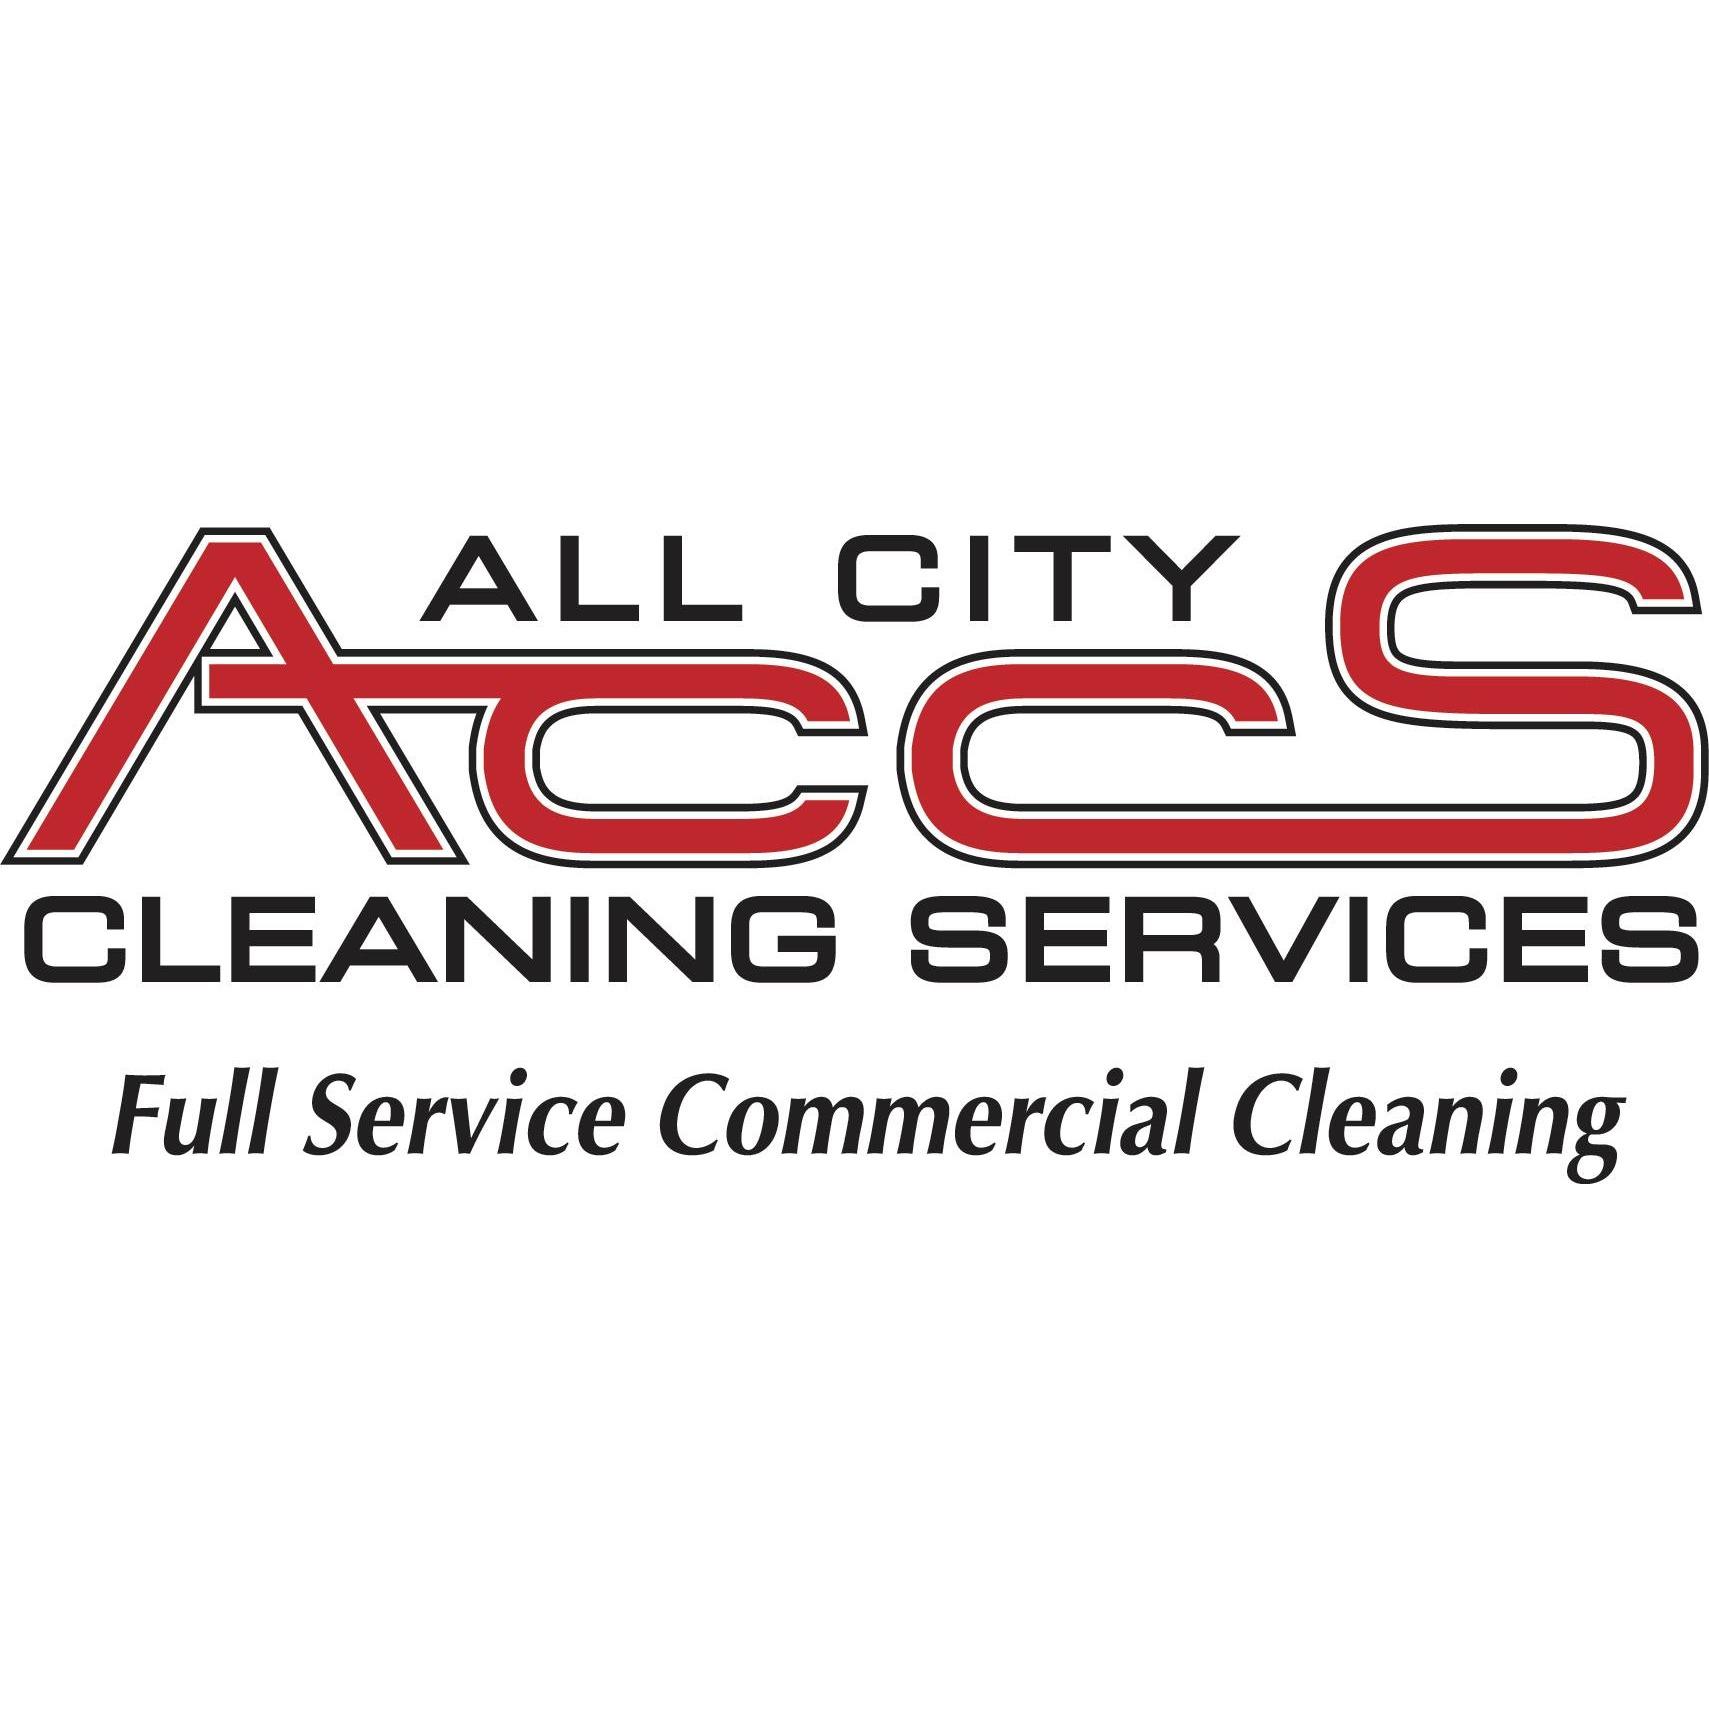 All City Cleaning Services Logo